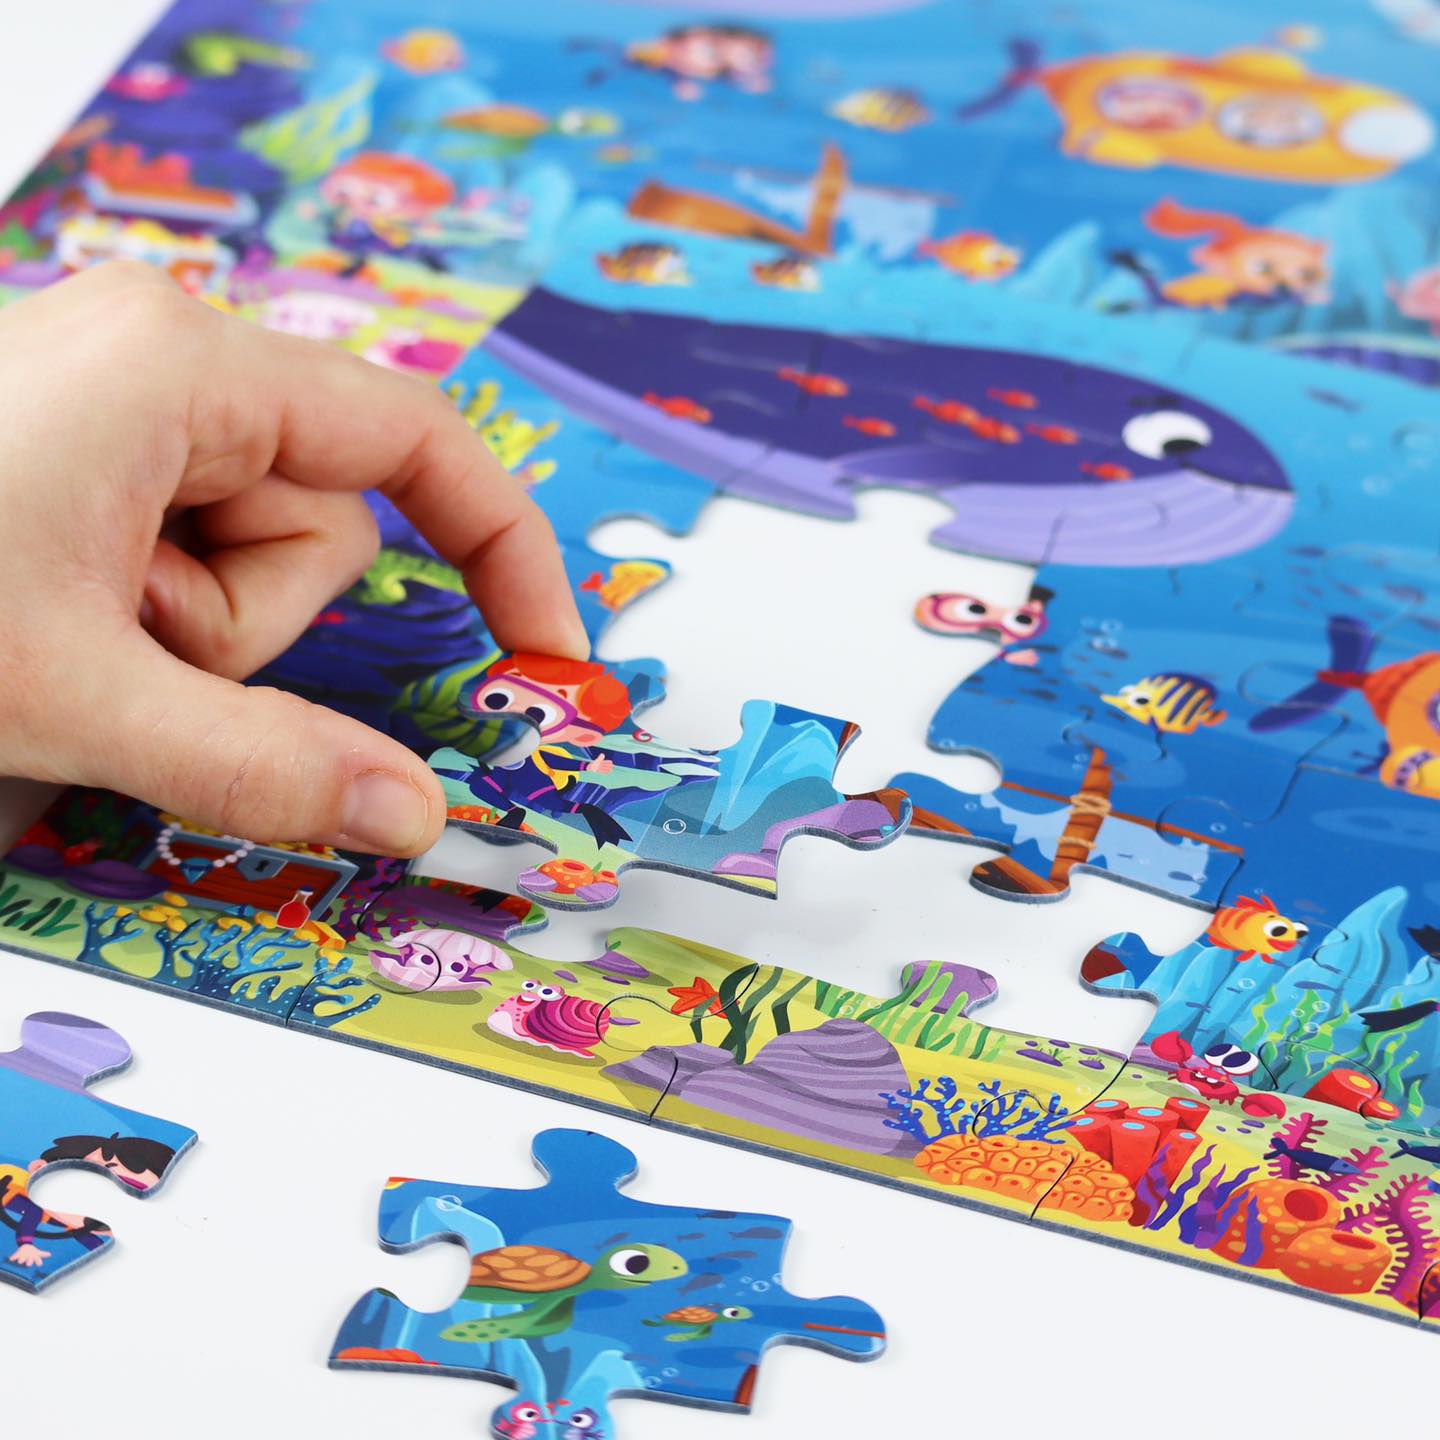 Calypto Jigsaw Puzzle - Life Under The Sea 36 Pieces